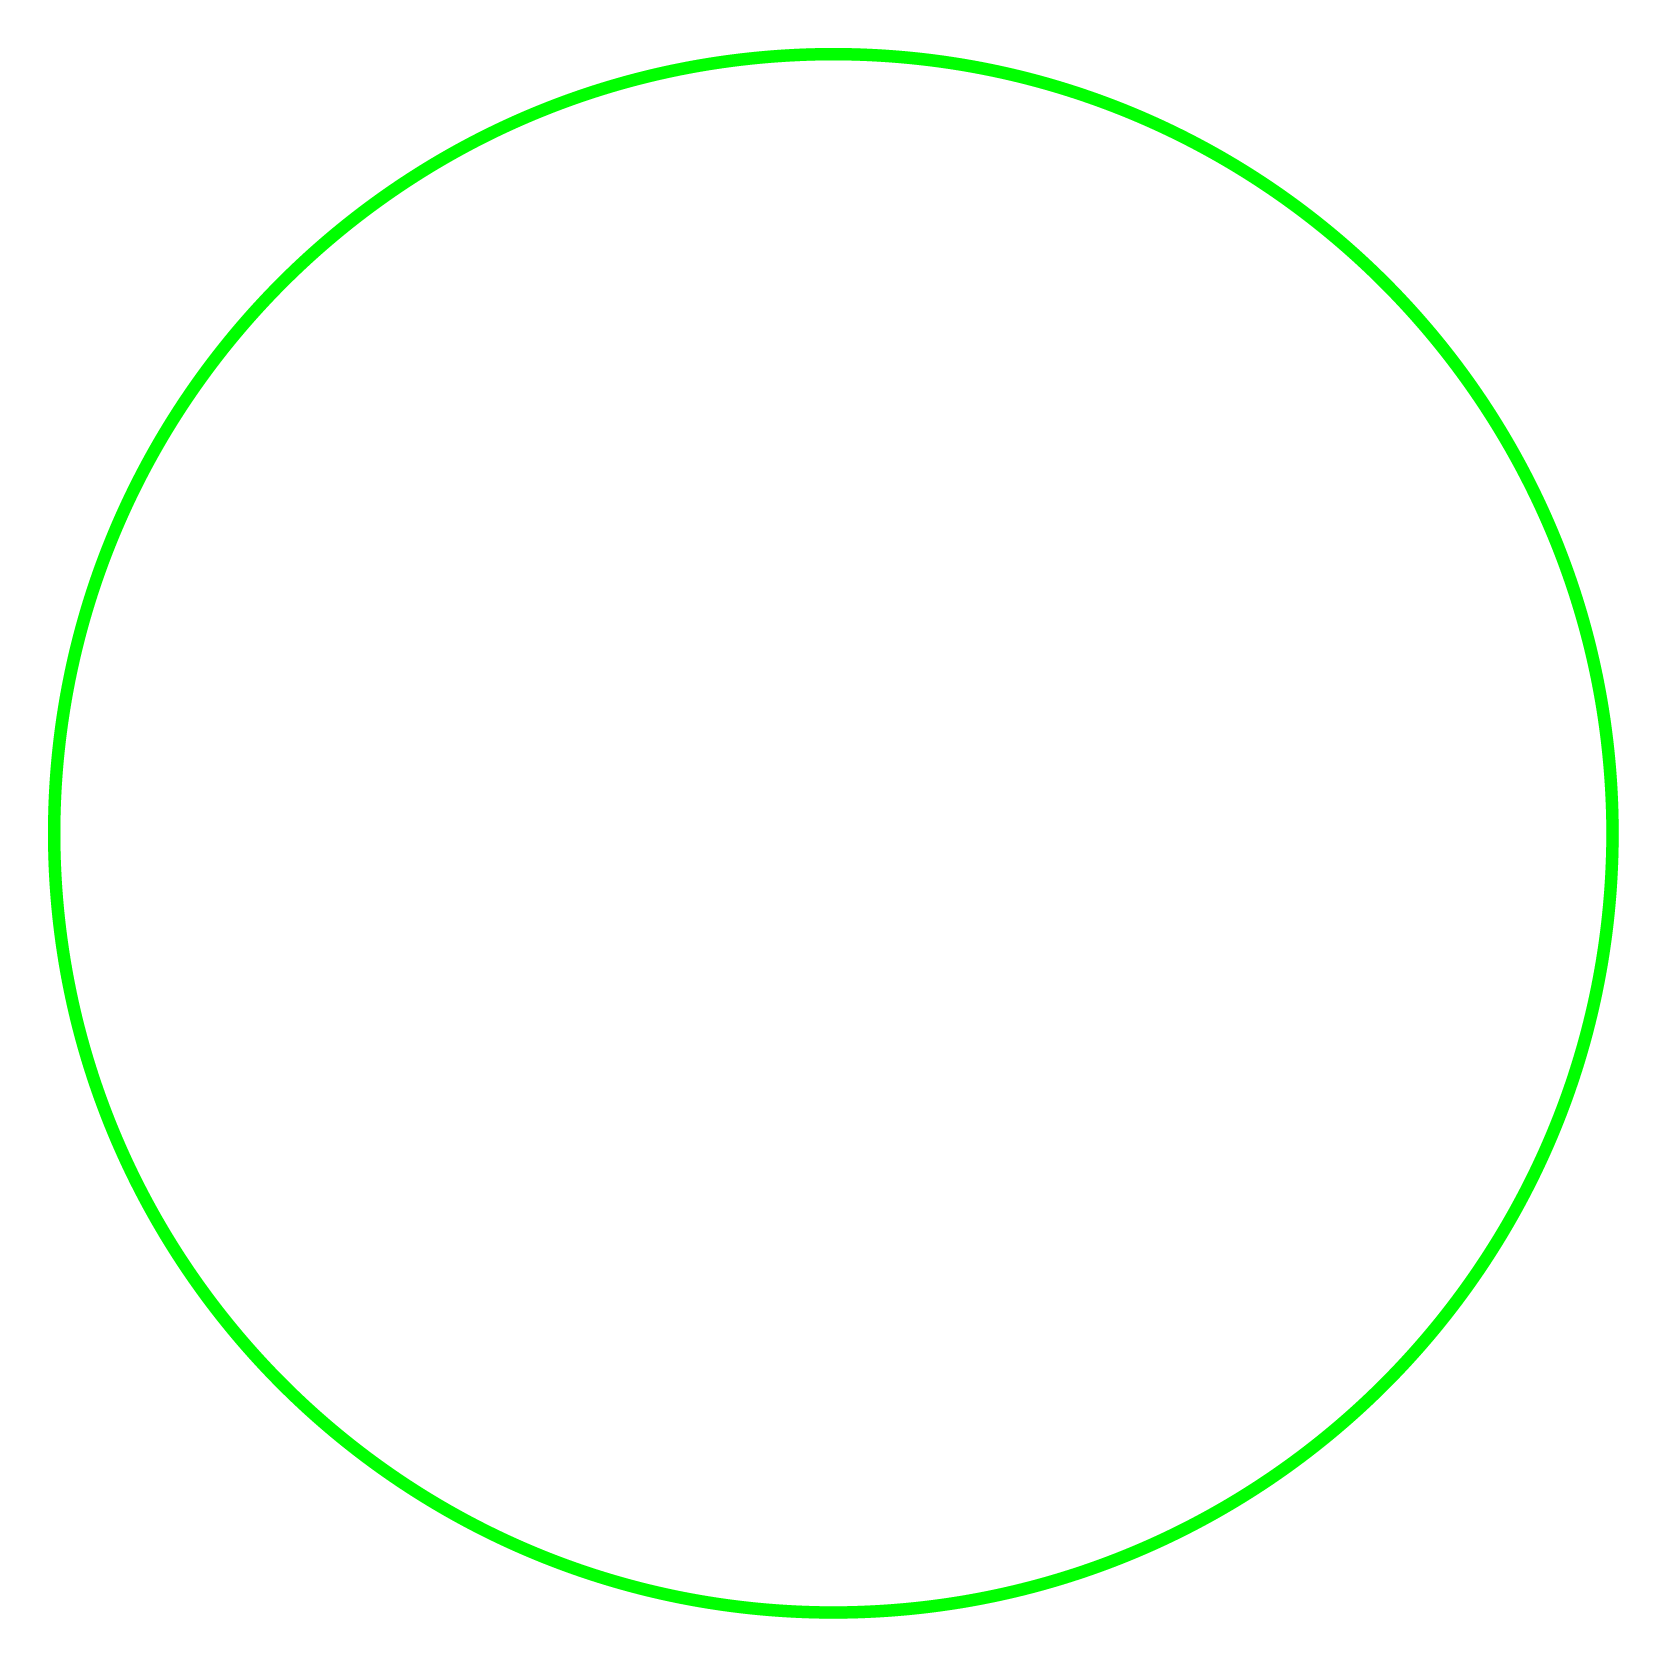 yield sign vector icon